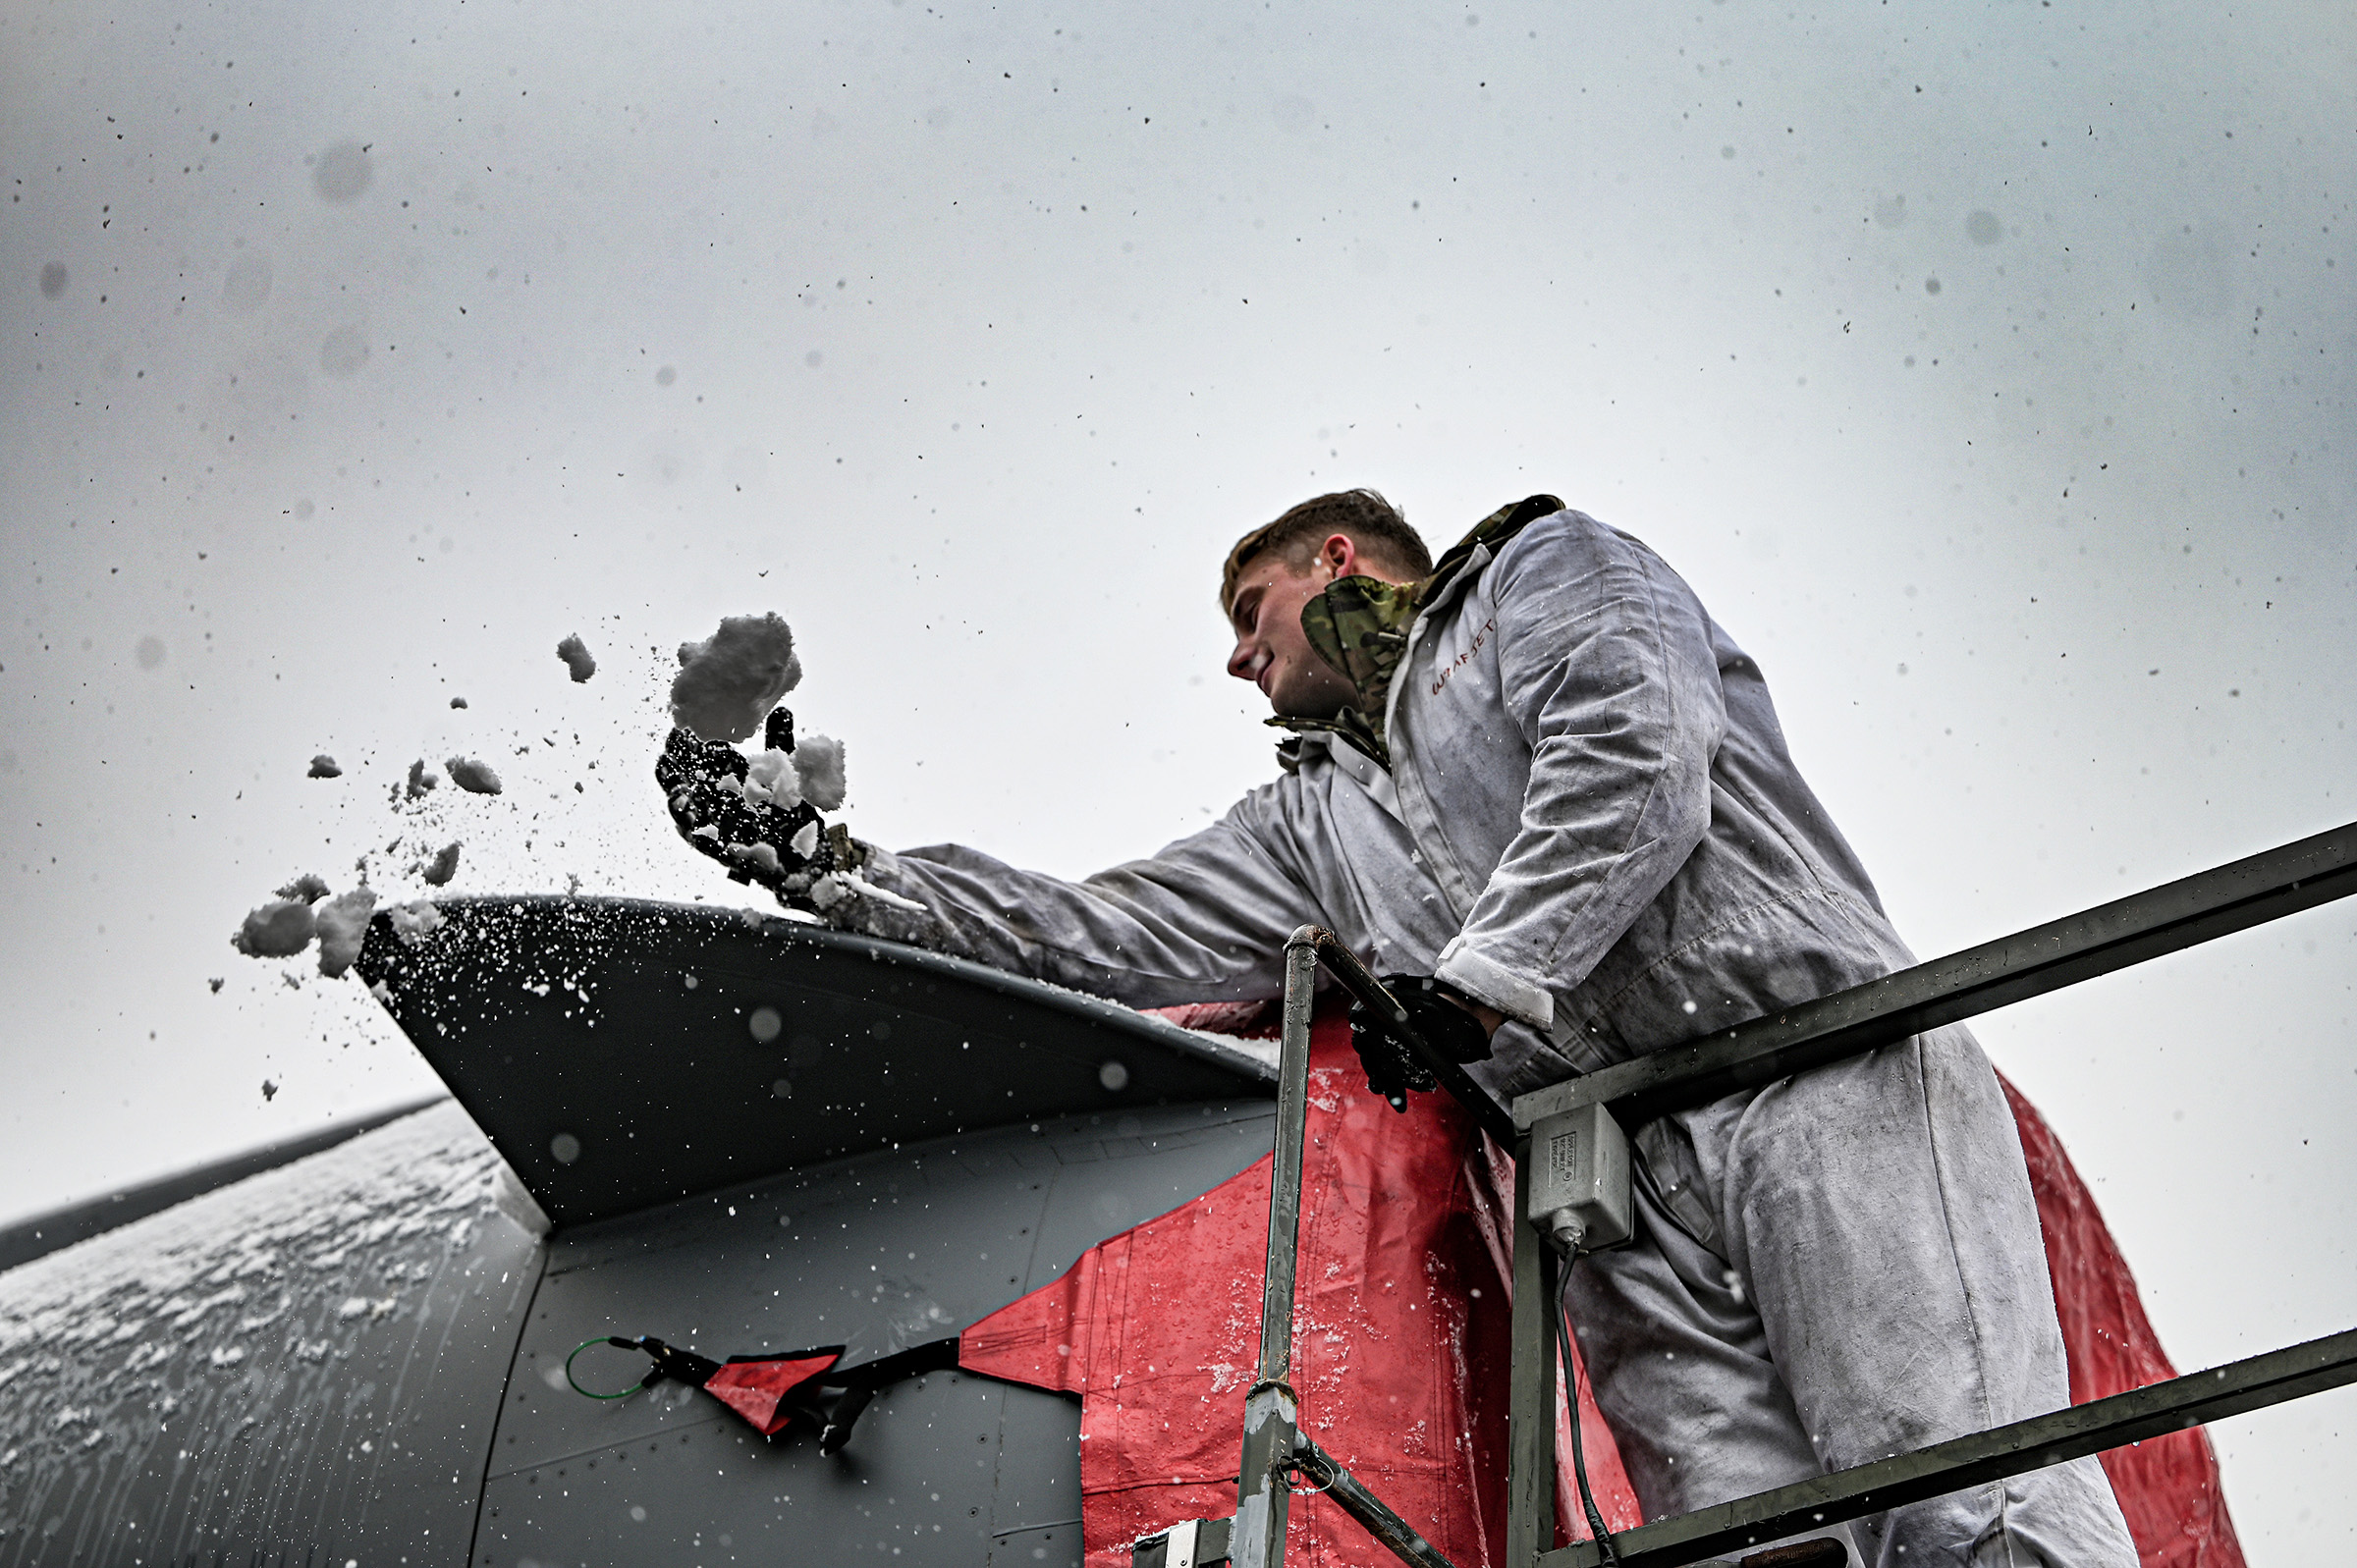 Senior Airman Killian Sullivan, 445th Aircraft Maintenance Squadron aircraft mechanic, clears
snow as he installs an engine cover on a C-17 Globemaster III at Wright-Patterson AFB, Ohio, Jan. 6, 2024. (U.S. Air Force photo/Master Sgt. Patrick O’Reilly)